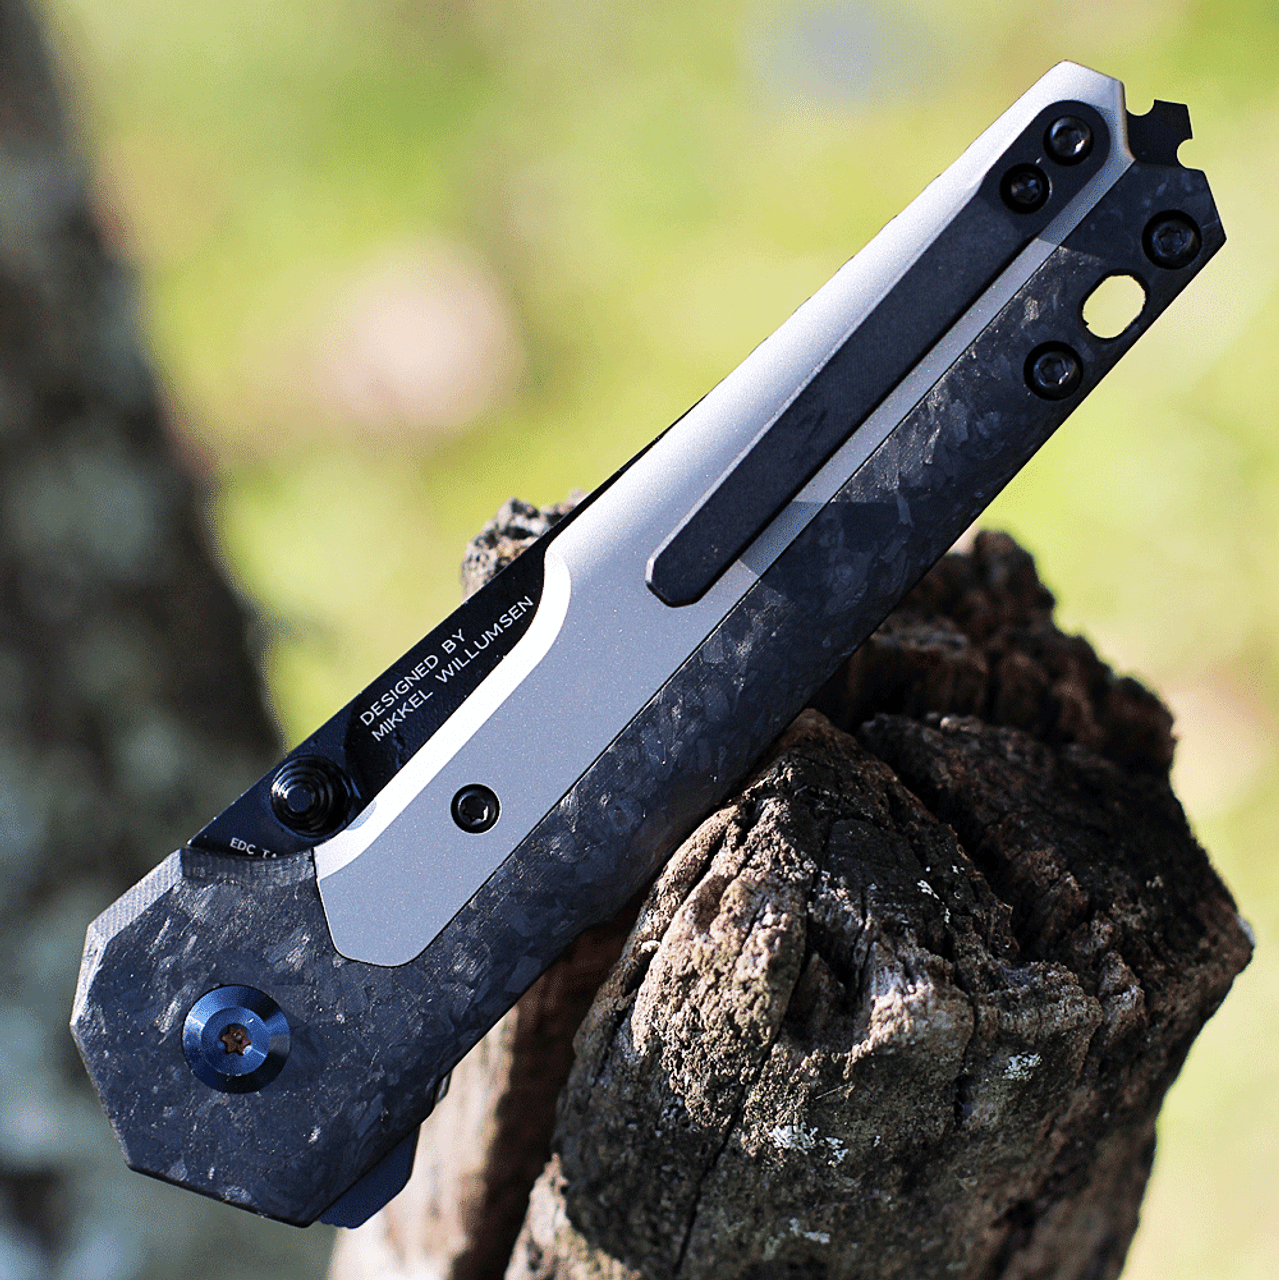 Kansept Knives EDC Tac (K2009A1) - 3.1" S35VN Black Ti-Coated Drop Point Plain Blade, Gray Titianium Handle with Shred Carbon Fiber Inlay